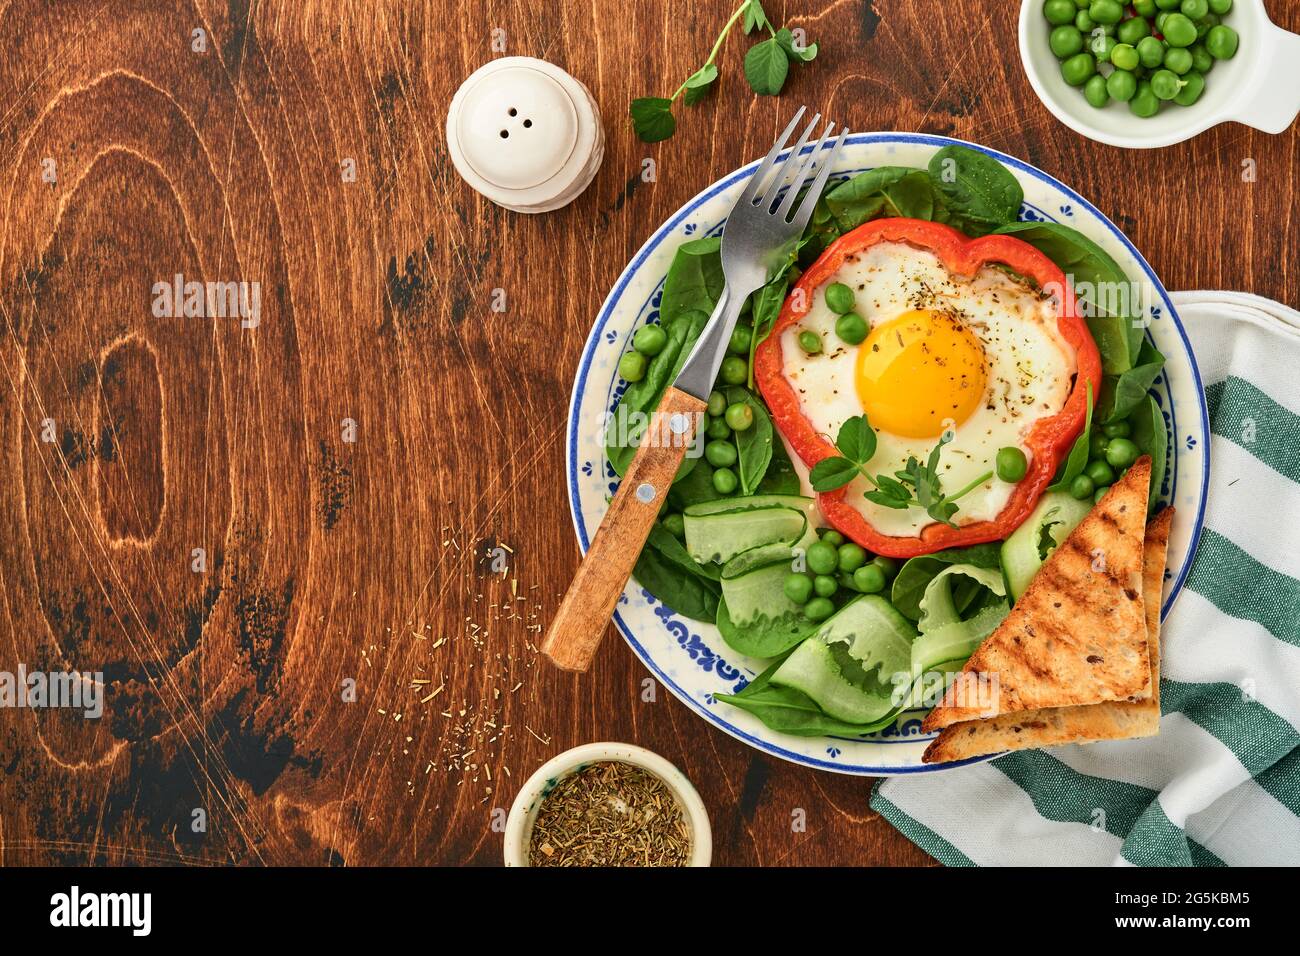 Red bell peppers stuffed with eggs, spinach leaves, green peas and microgreens on a breakfast plate on old wooden table background. Top view. Stock Photo